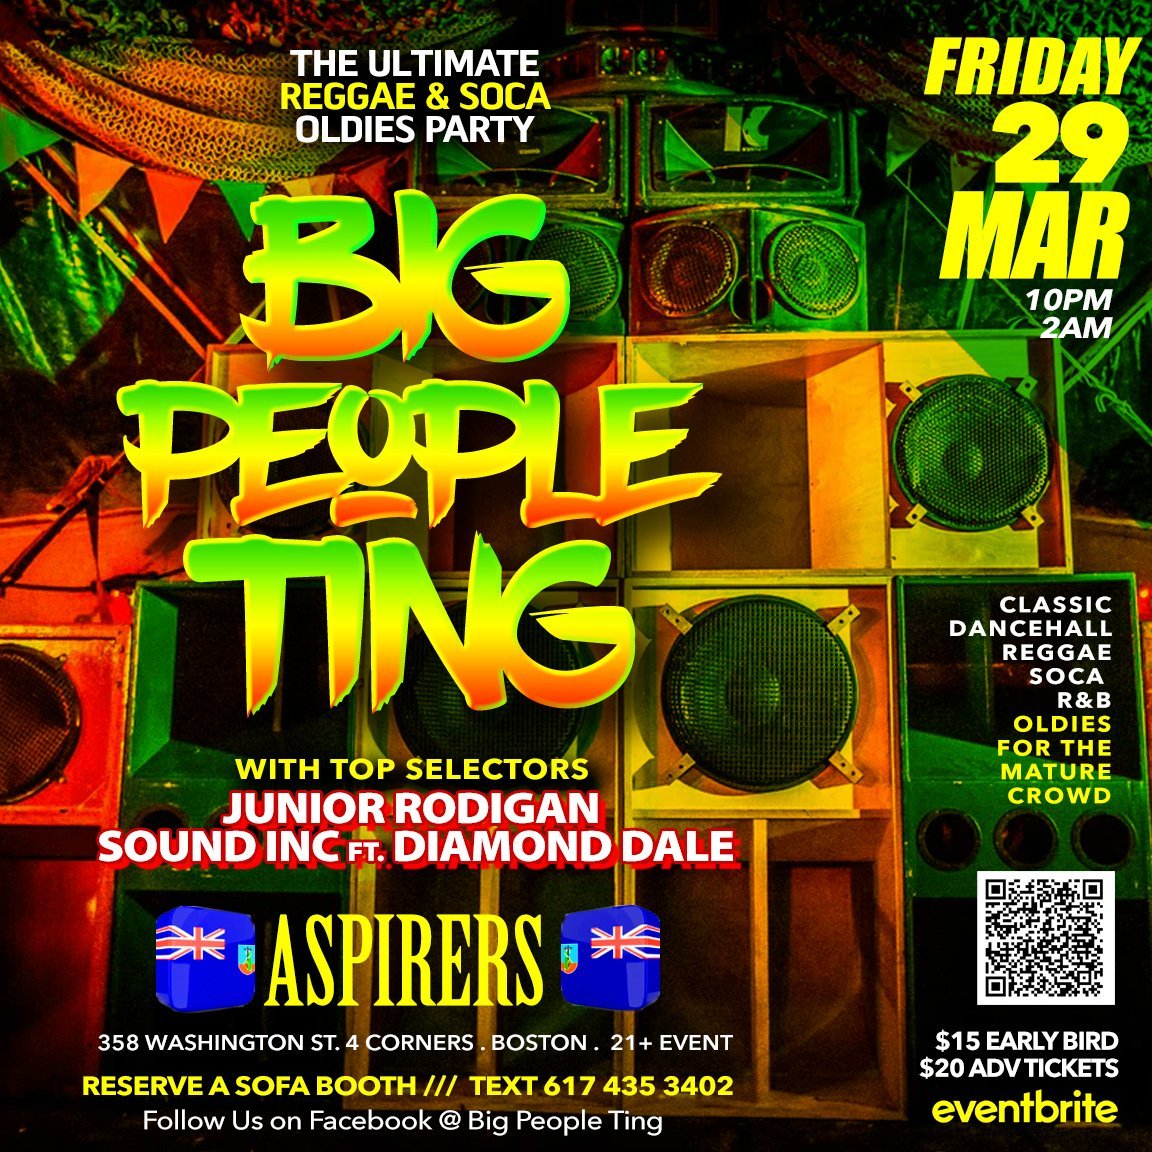 SAVE THE DATE : MARCH 29th 
#BigPeopleTing 
The March edition of 
THE BEST OLDIES PARTY in #Boston 

Get there early 
Last time we hit capacity before 1am 
Get your advance tickets here >> …ingOldiesPartyAspirers.eventbrite.com